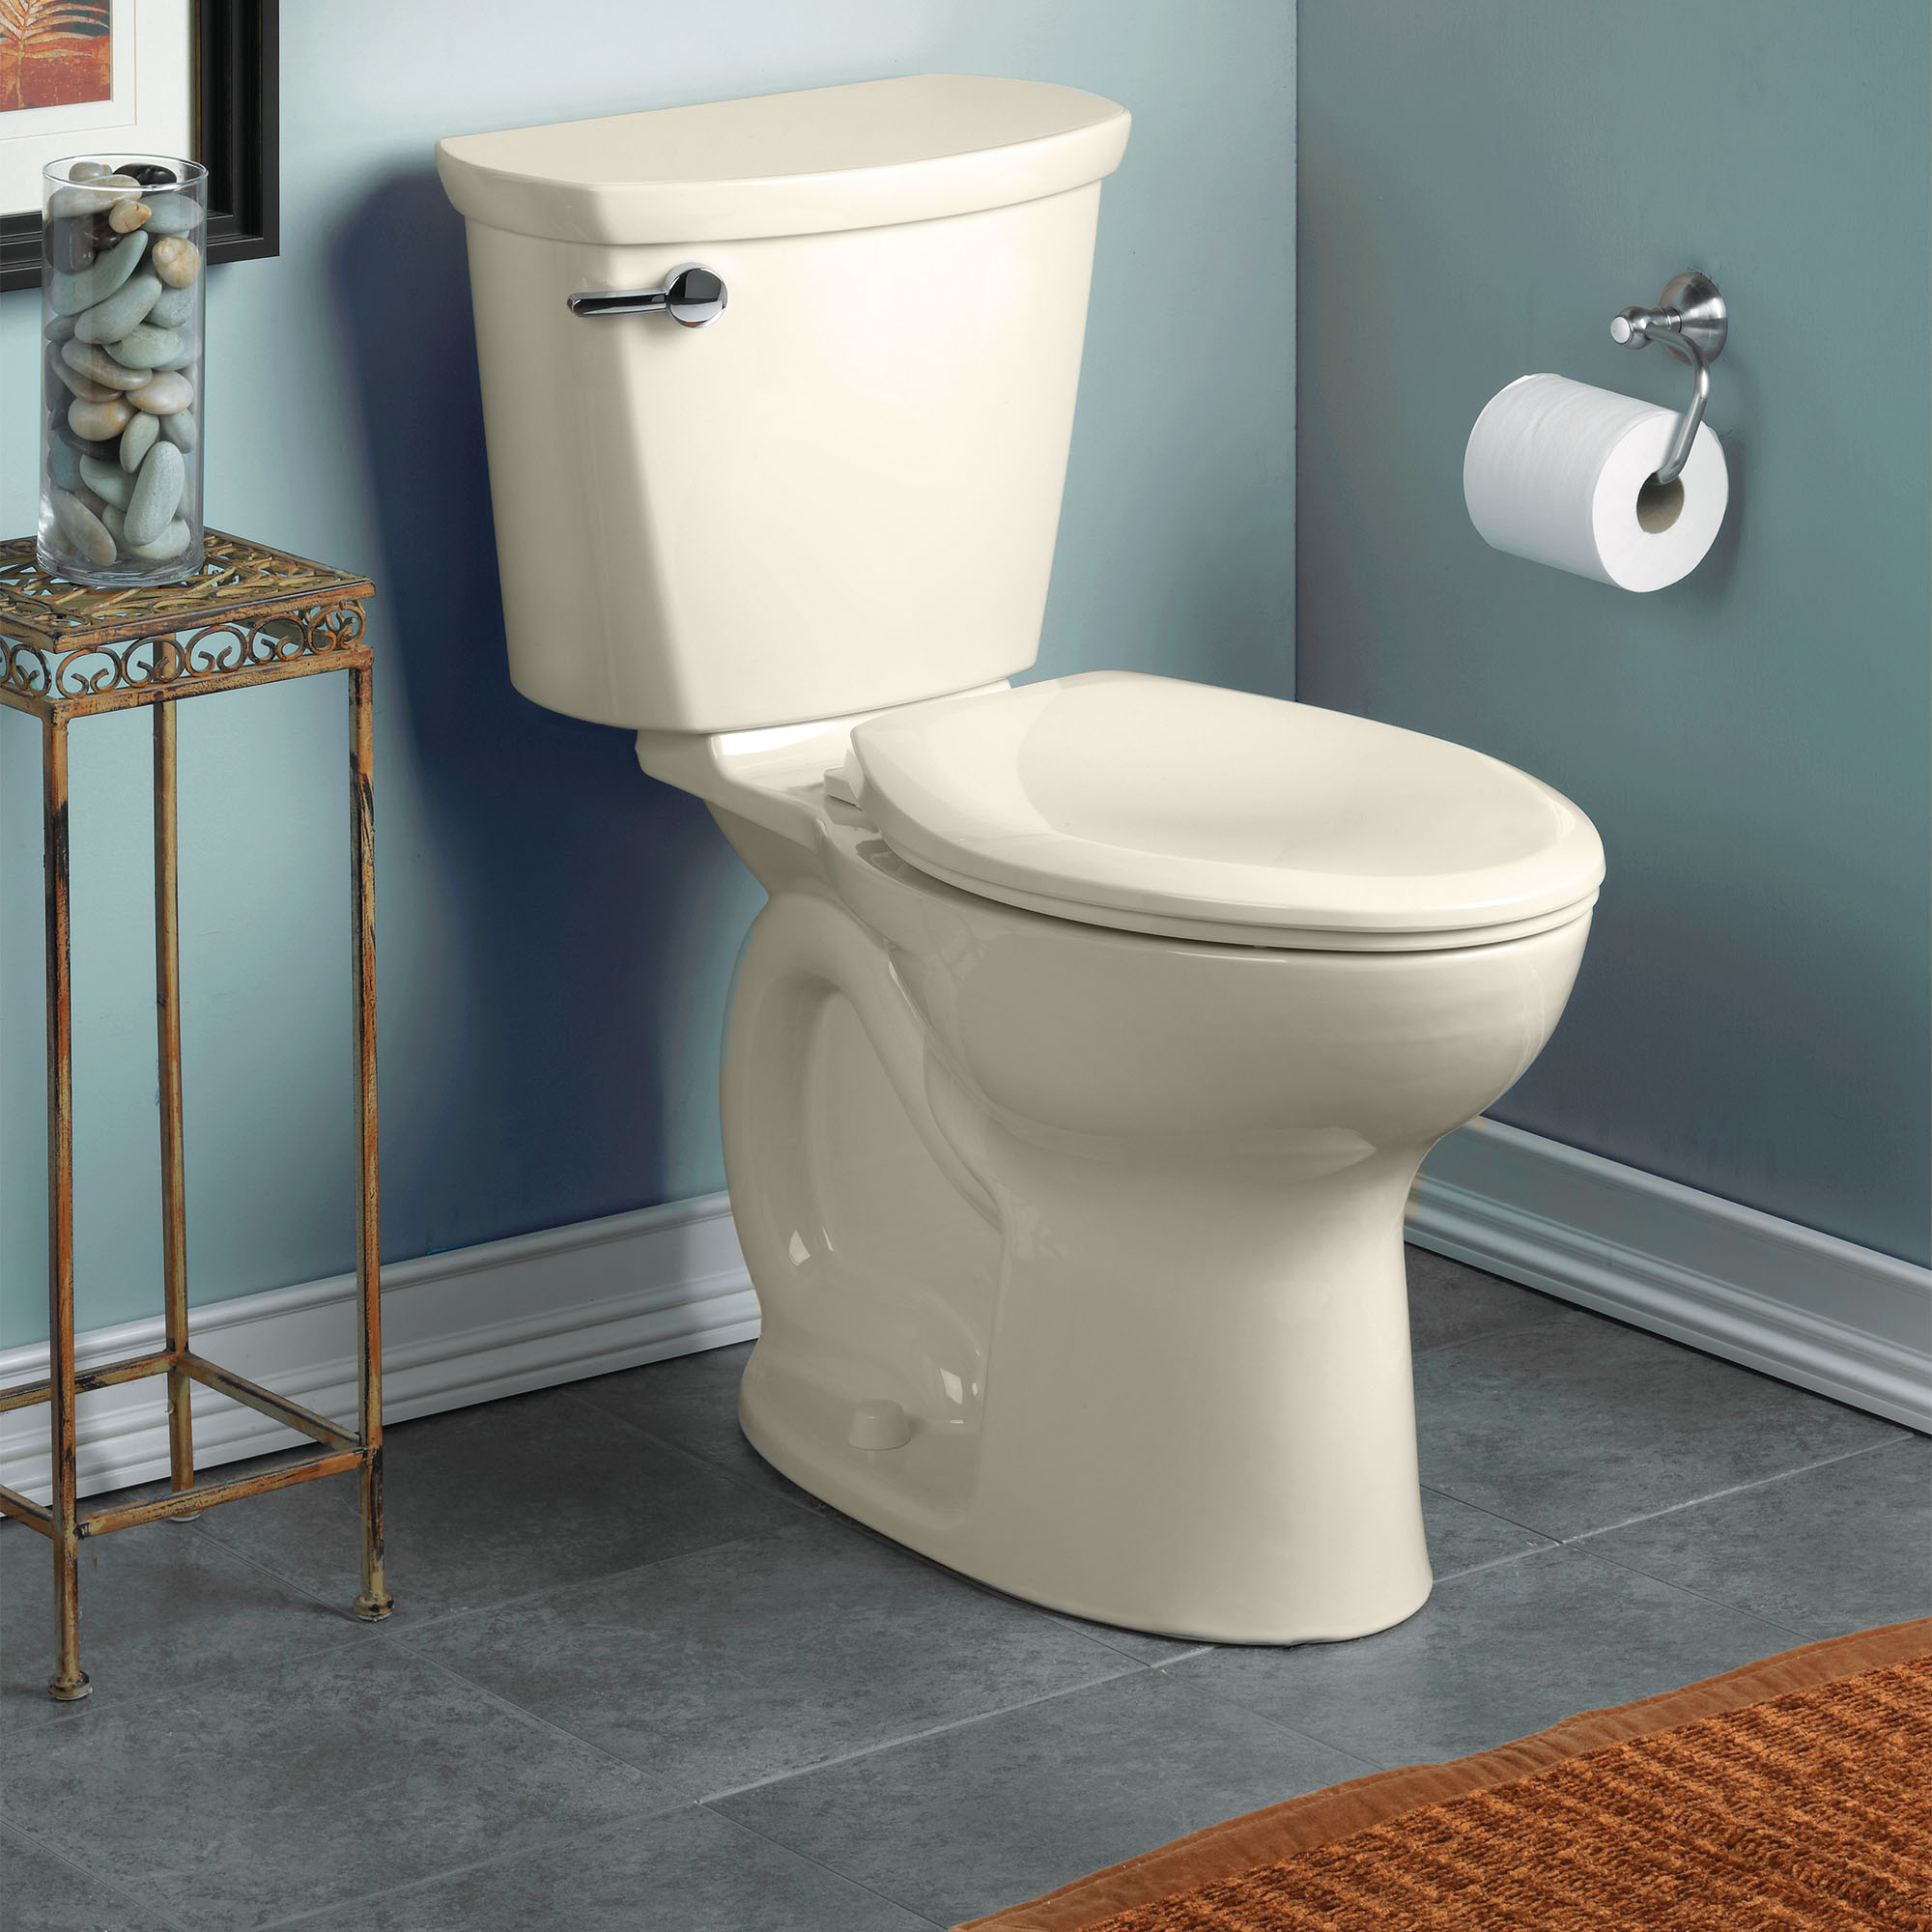 Cadet® PRO Two-Piece 1.28 gpf/4.8 Lpf Chair Height Elongated 10-Inch Rough Toilet Less Seat